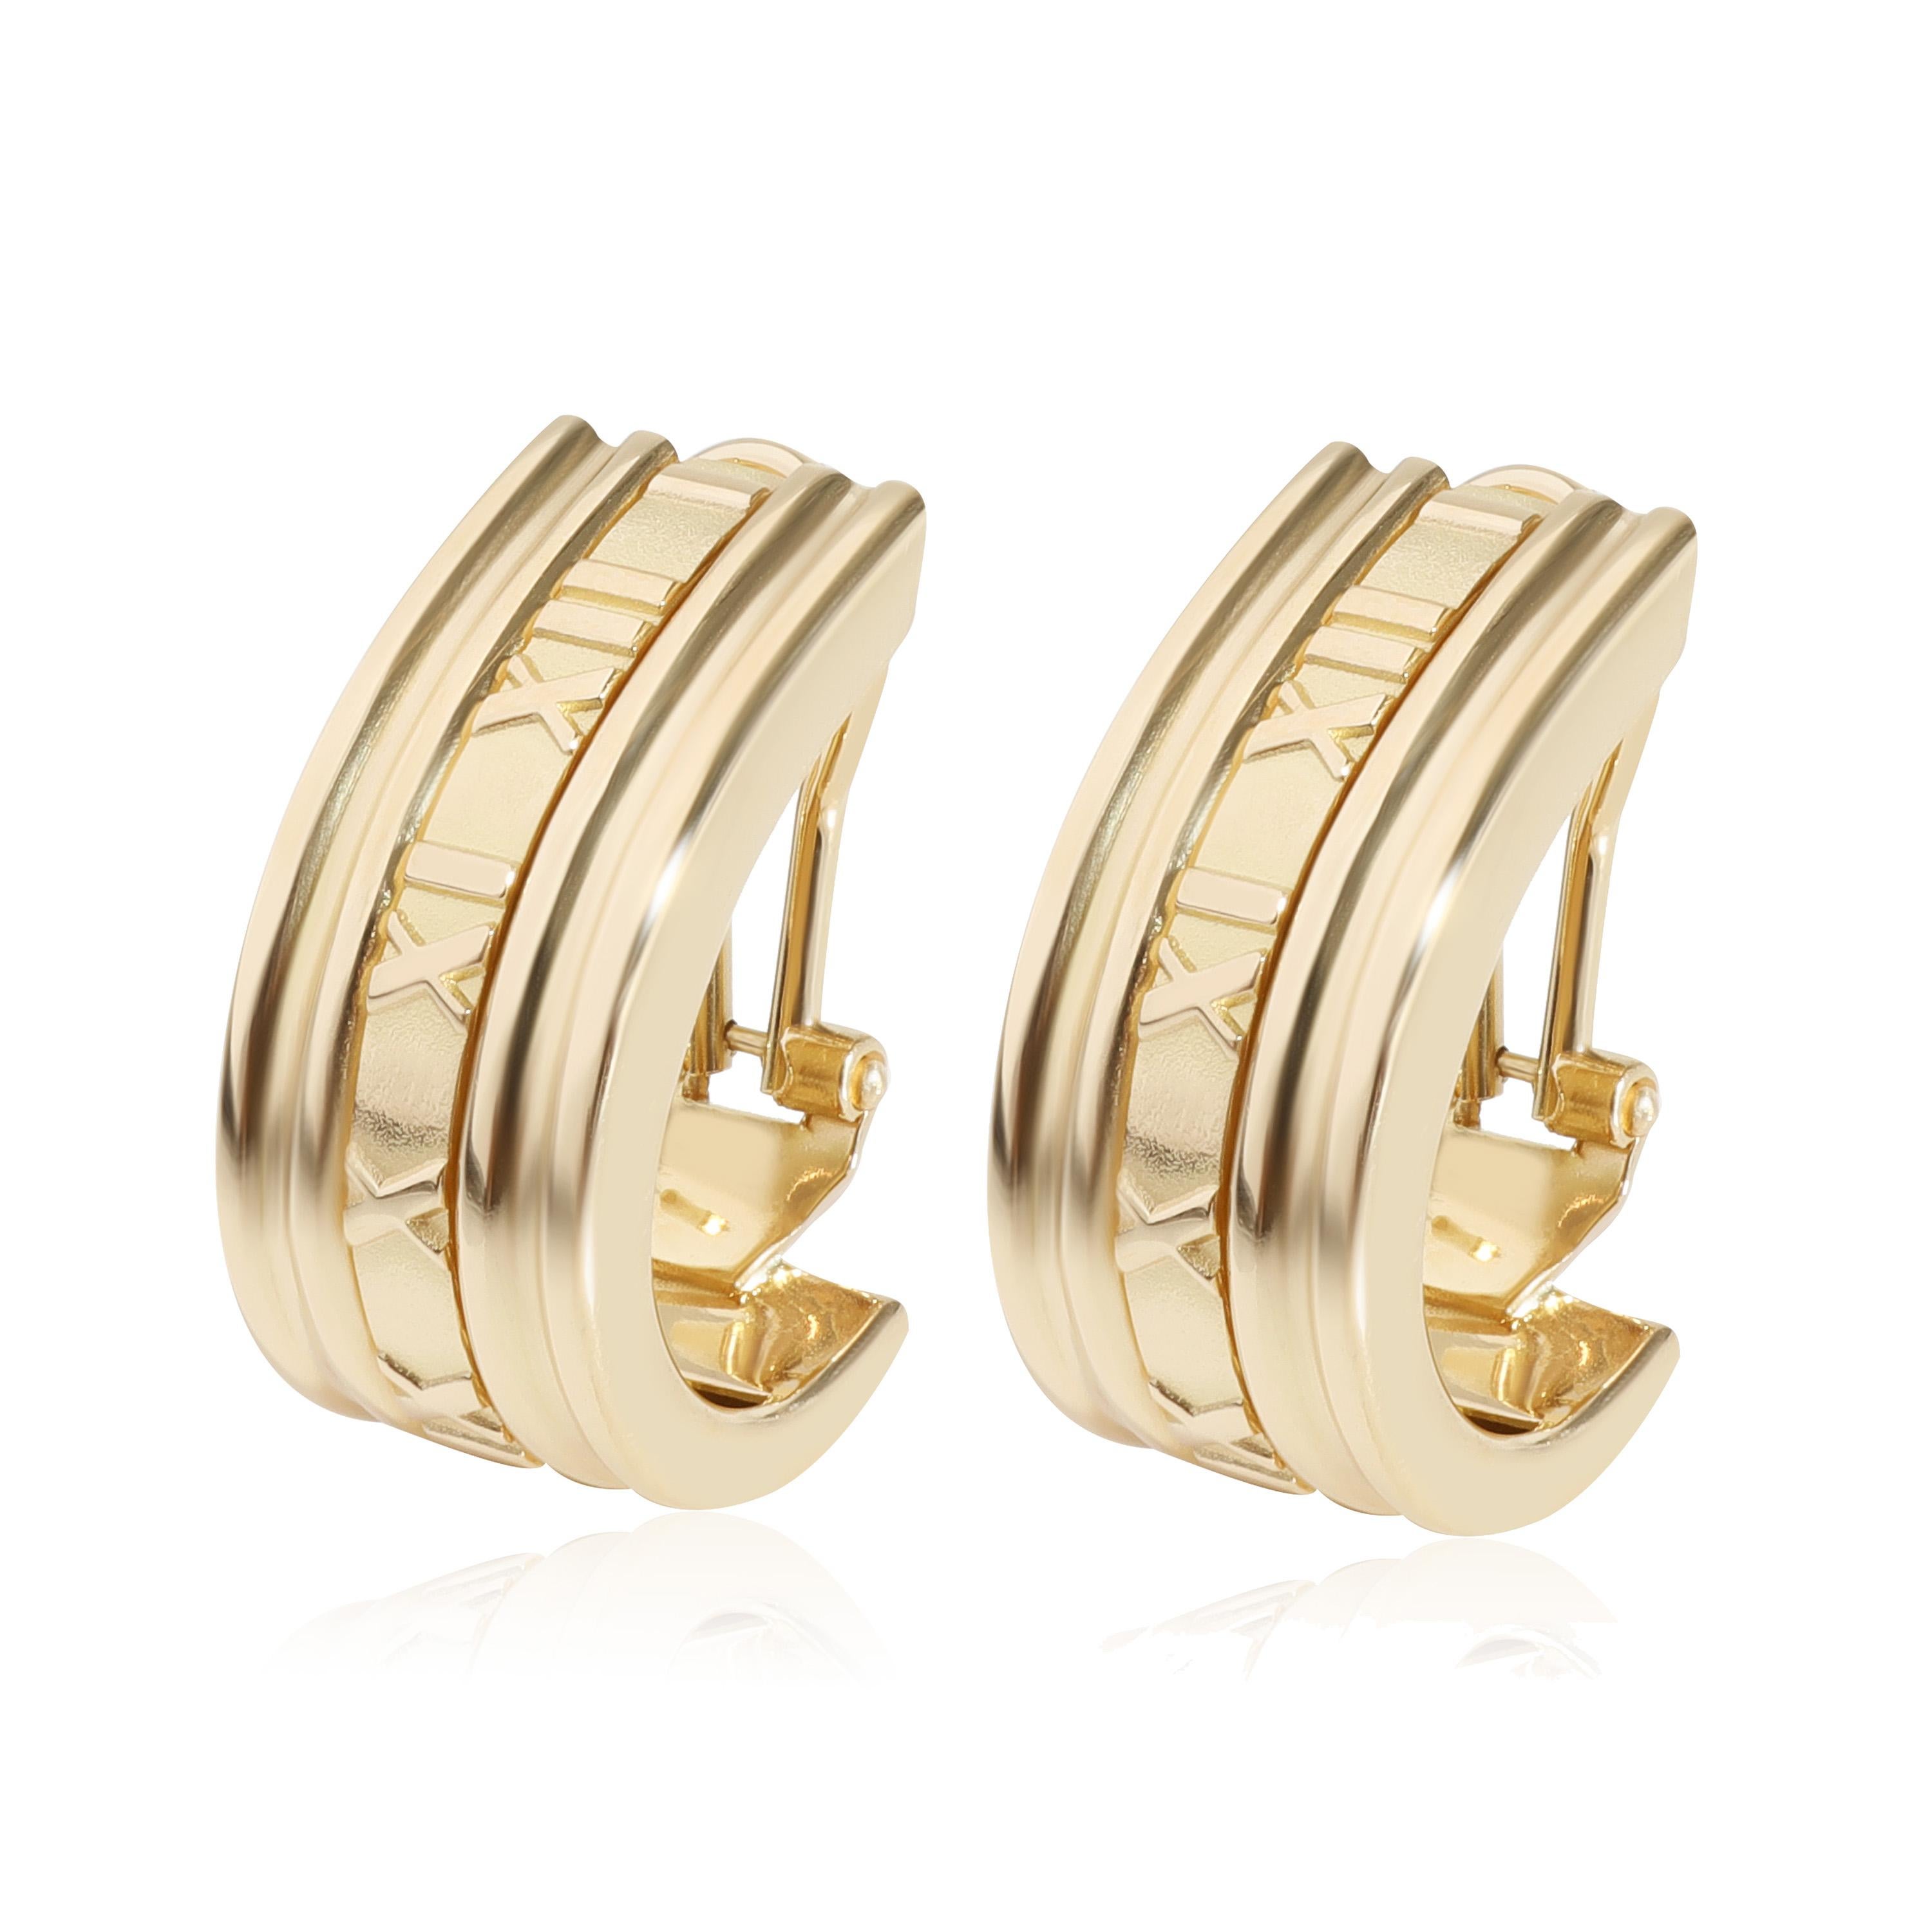 Tiffany & Co. Atlas Earrings in 18k Yellow Gold

PRIMARY DETAILS
SKU: 117520
Listing Title: Tiffany & Co. Atlas Earrings in 18k Yellow Gold
Condition Description: Retails for 2550 USD. In excellent condition and recently polished.
Brand: Tiffany &